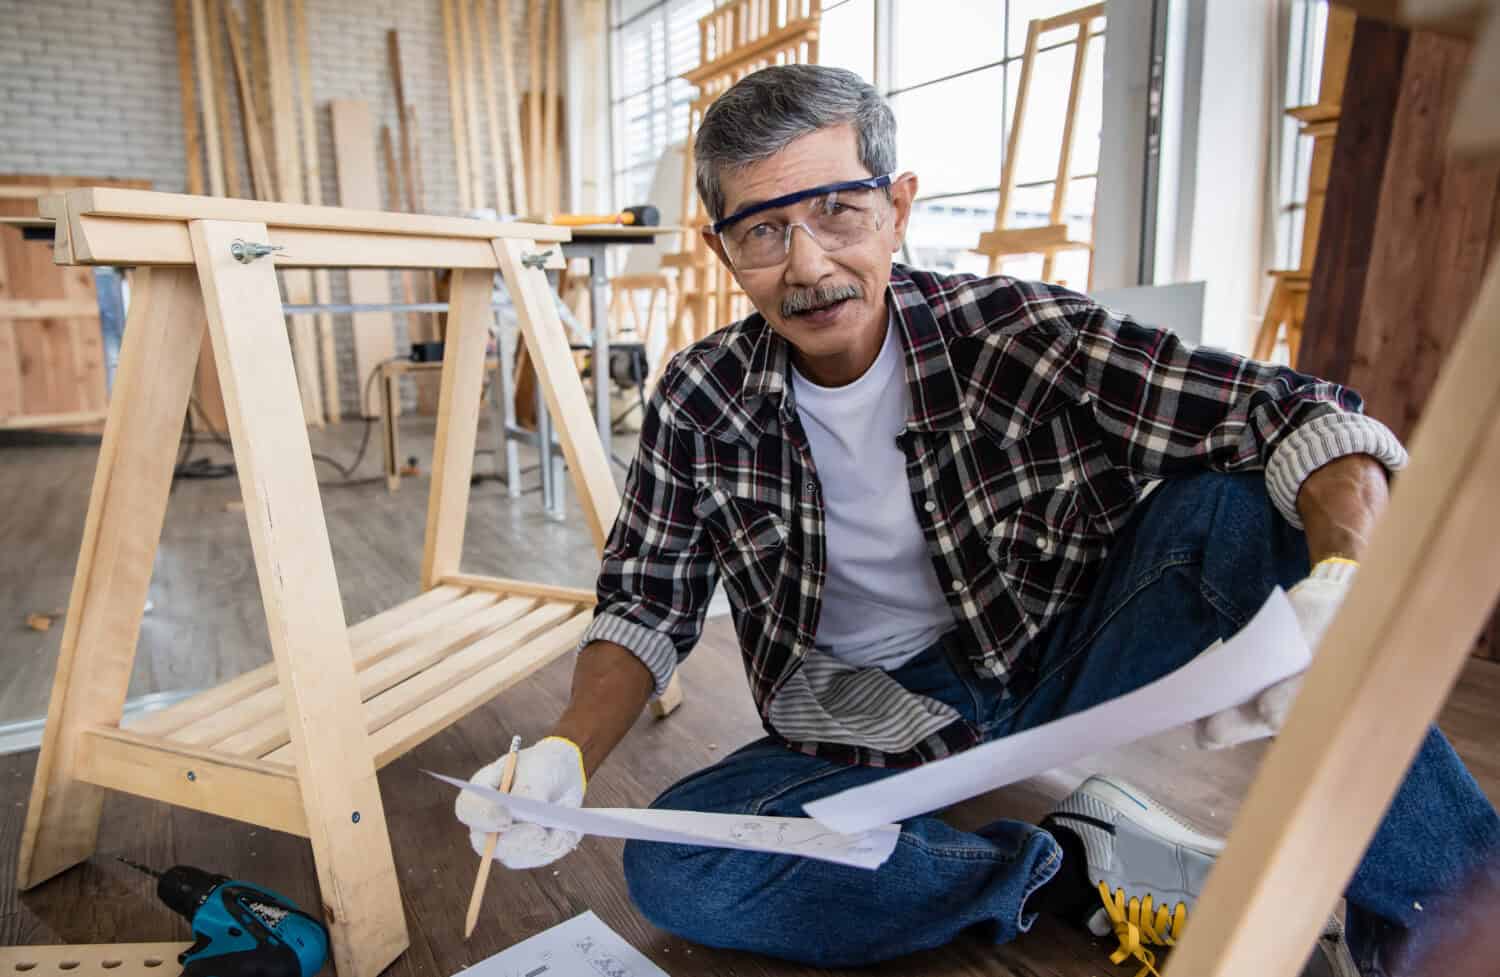 Aged Asian man with blueprint reading data on laptop while making timber furniture in joinery. Older retired people hobby and DIY in free time concept.